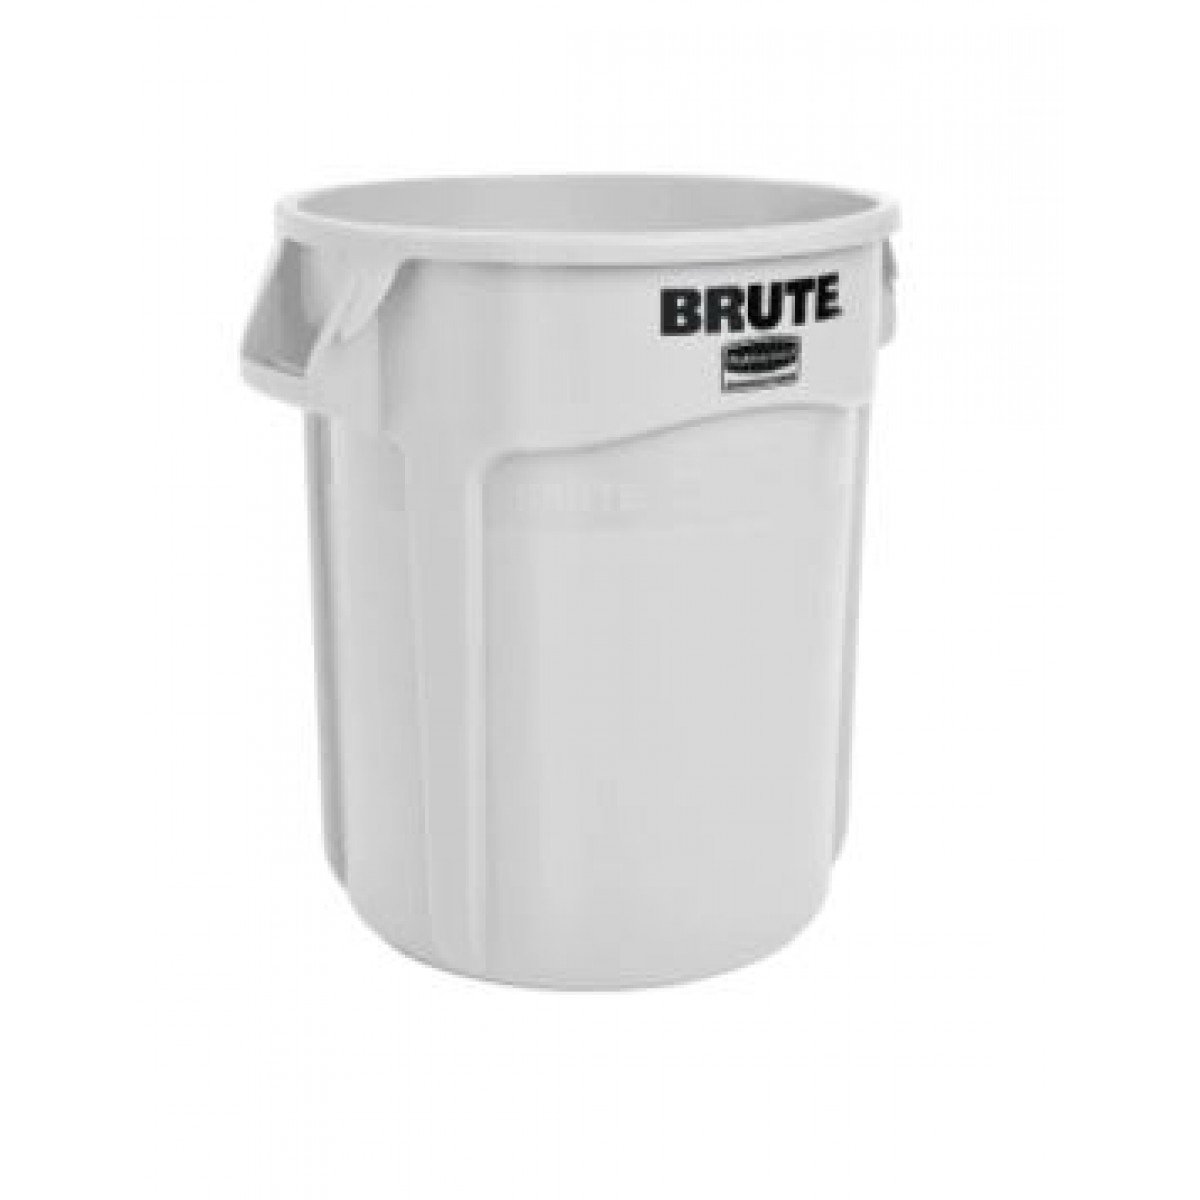 Rubbermaid Commercial Products Brute 75L White PE Waste Bin